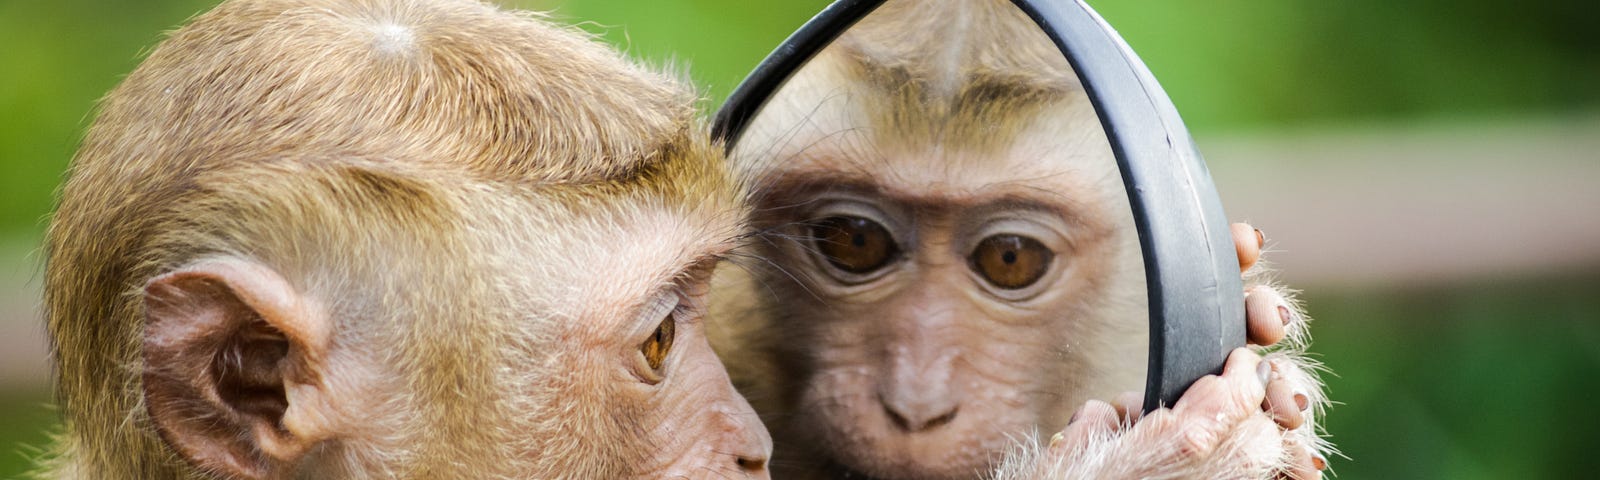 A photo of a monkey with a mirror.